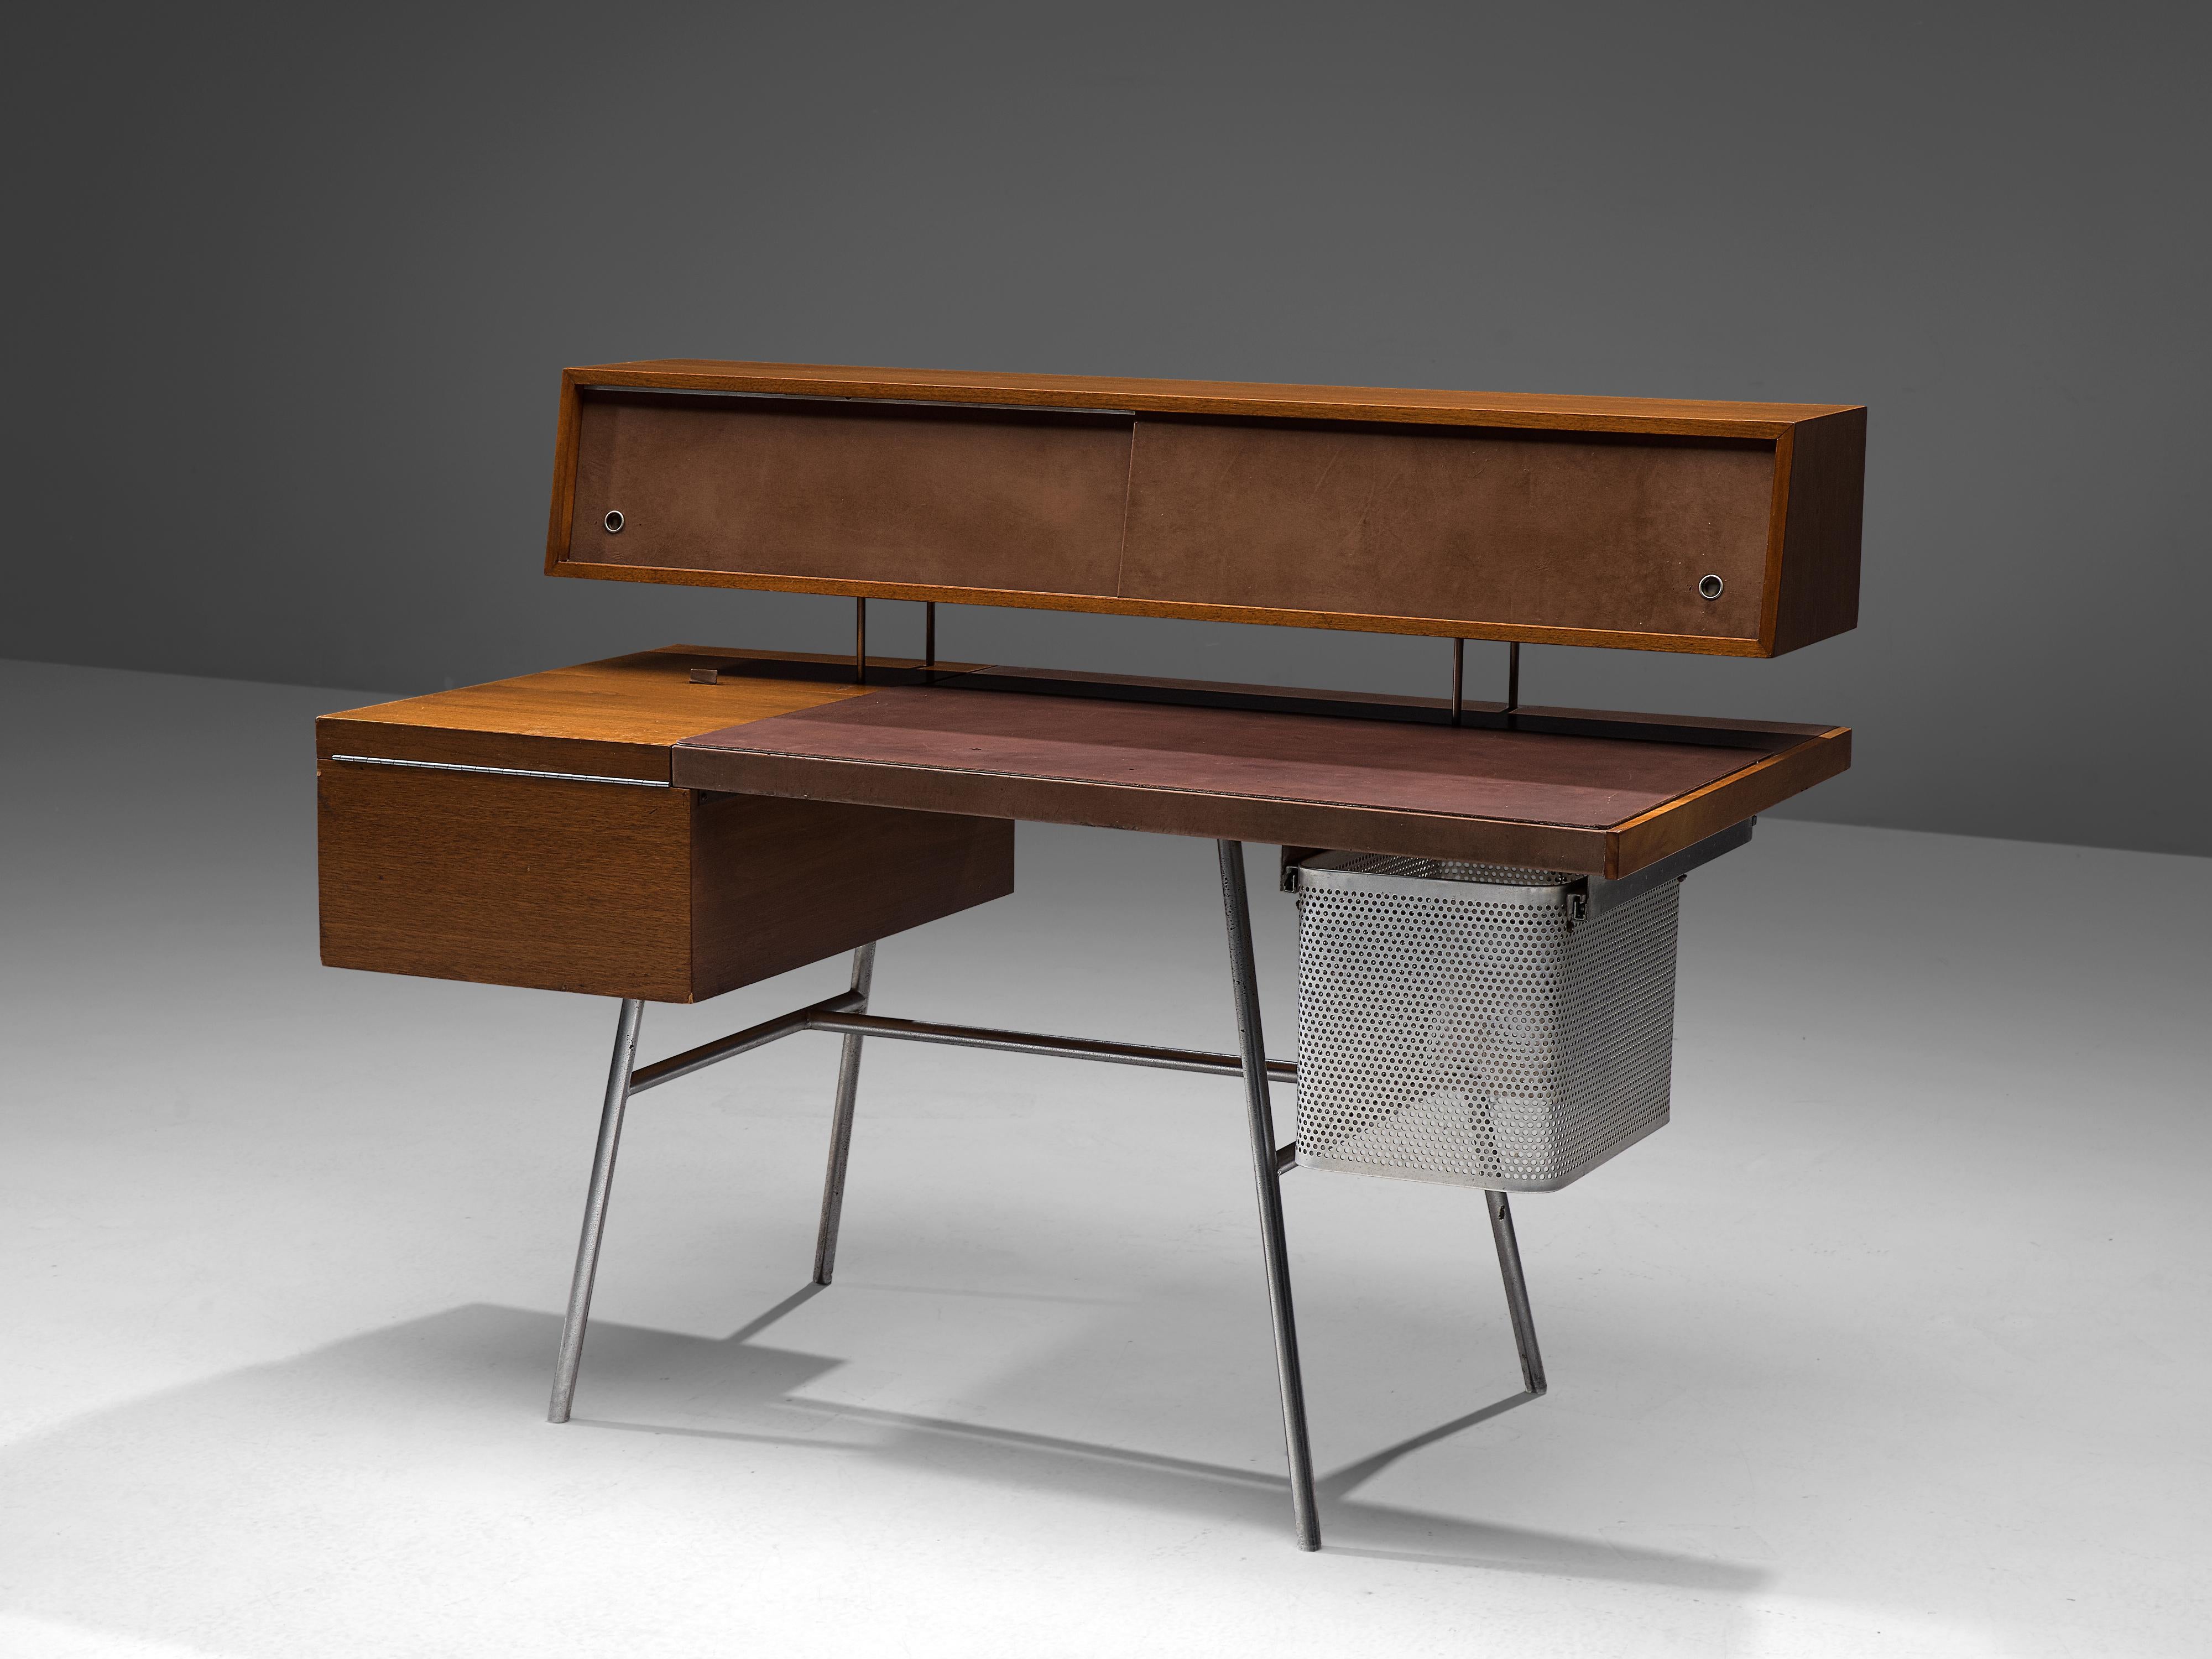 George Nelson for Herman Miller, desk n. 4658, walnut, steel, leather, United States, 1946

Made of walnut with original brown leather writing surface and sliding doors, resting on a base in steel, the desk 4658 does not only convinces through his